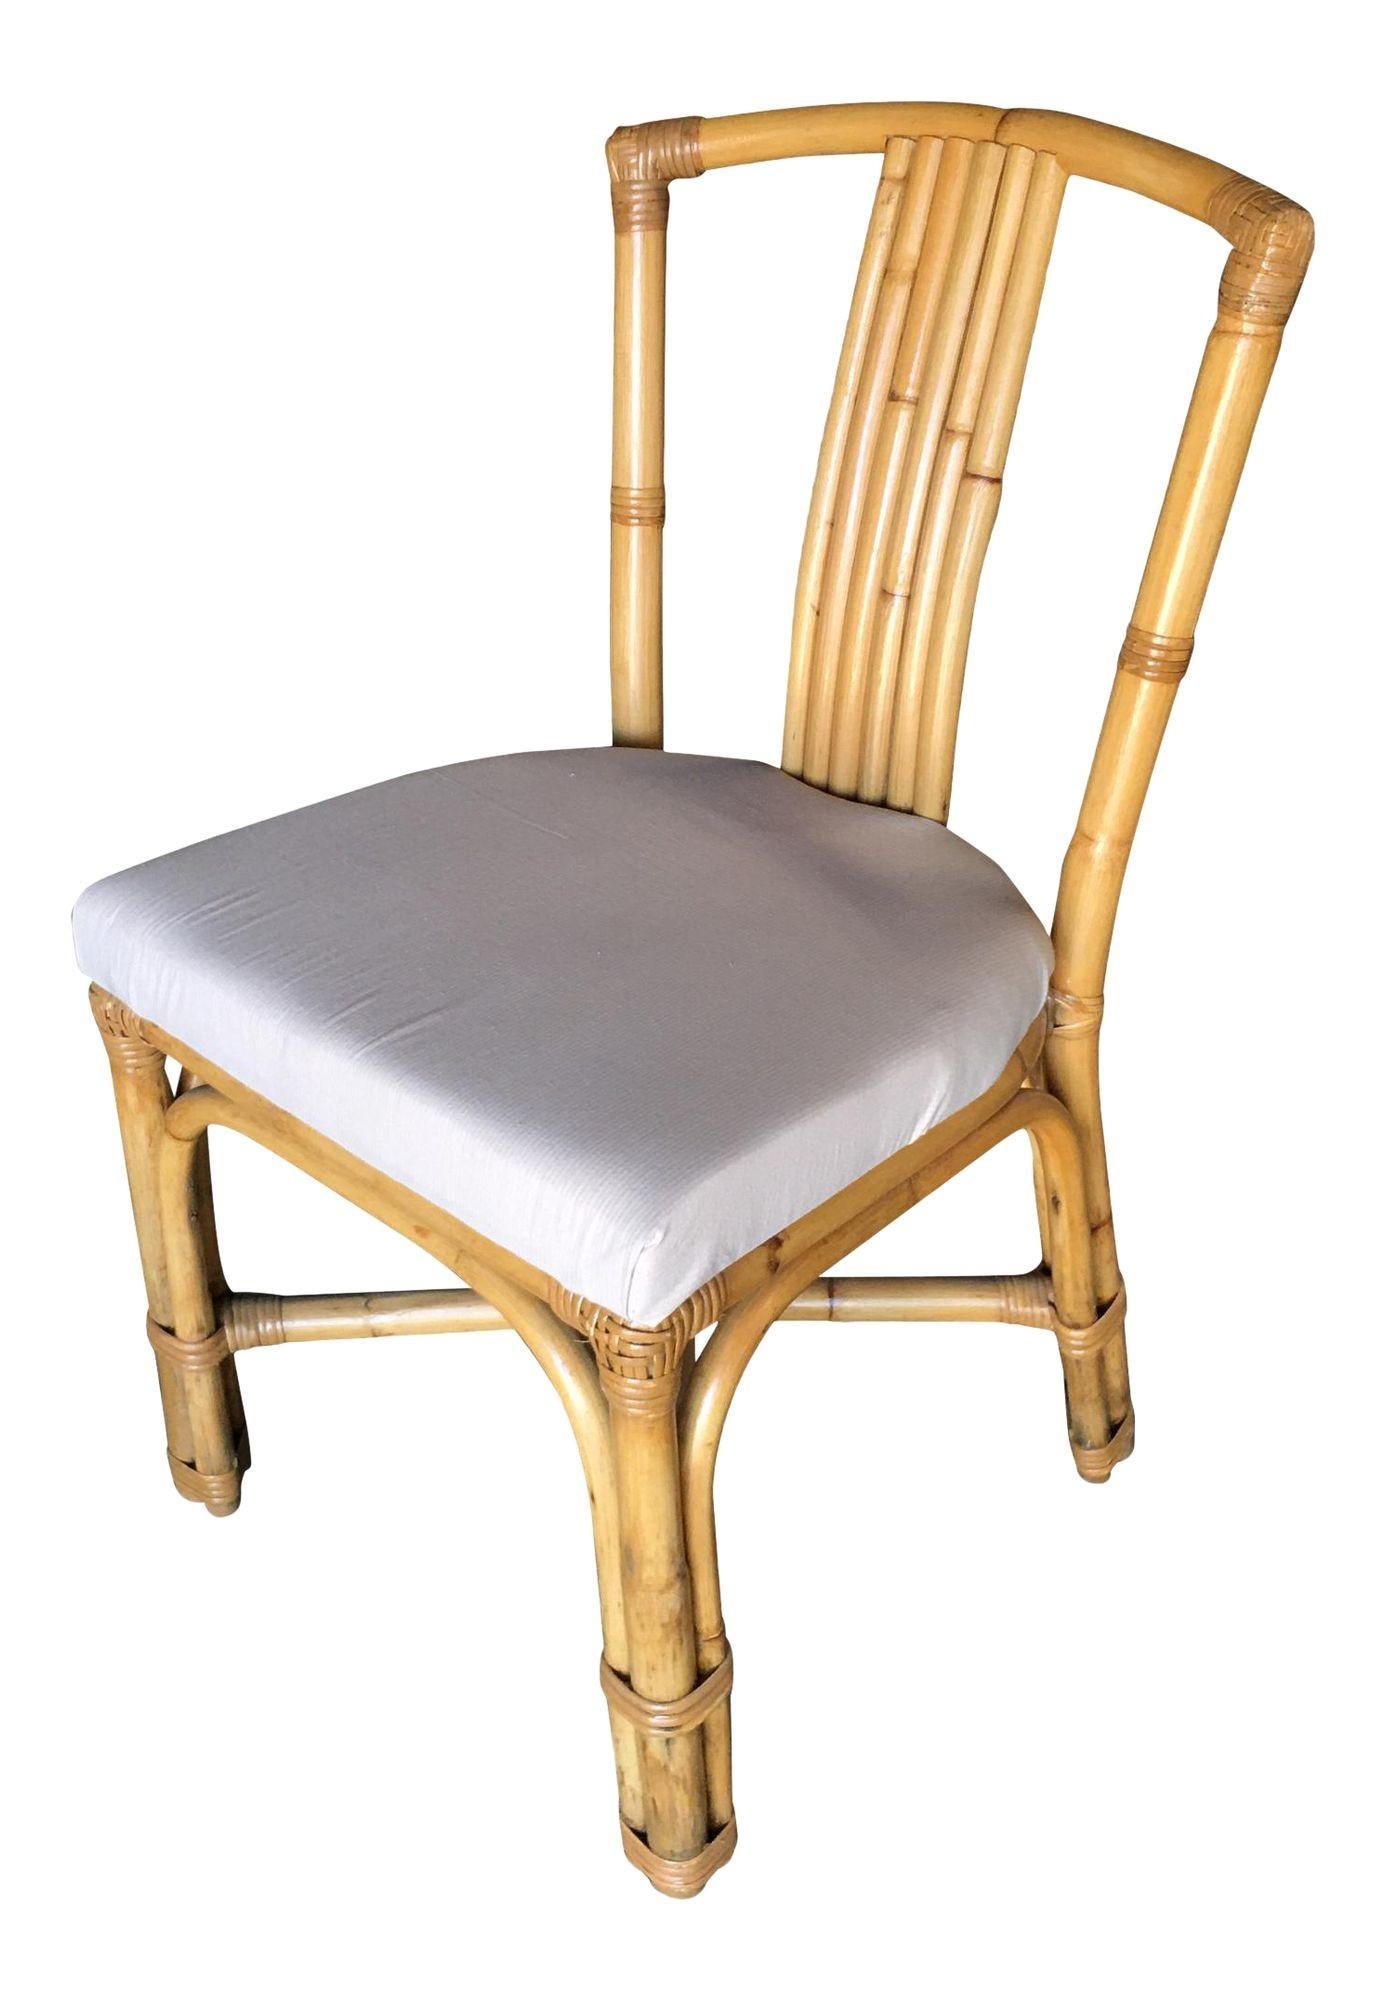 Vintage rattan side chair, chair features a 6-strand seat back and white cotton fabric foam padded seat. Restored to new for you. 

1950, United States

We only purchase and sell only the best and finest rattan furniture made by the best and